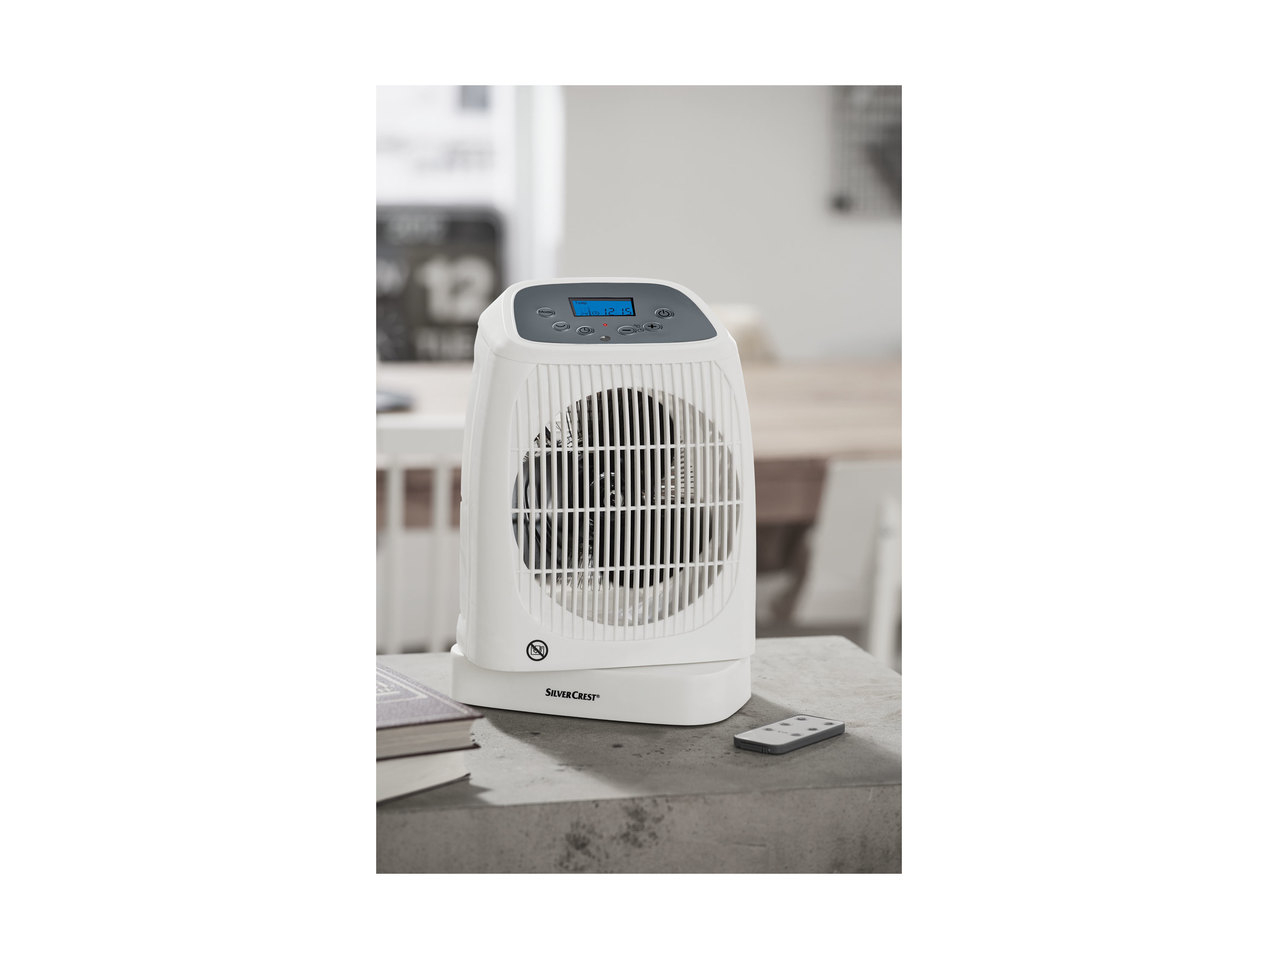 Silvercrest Fan Heater With Remote Control1 Lidl Great within size 1278 X 959